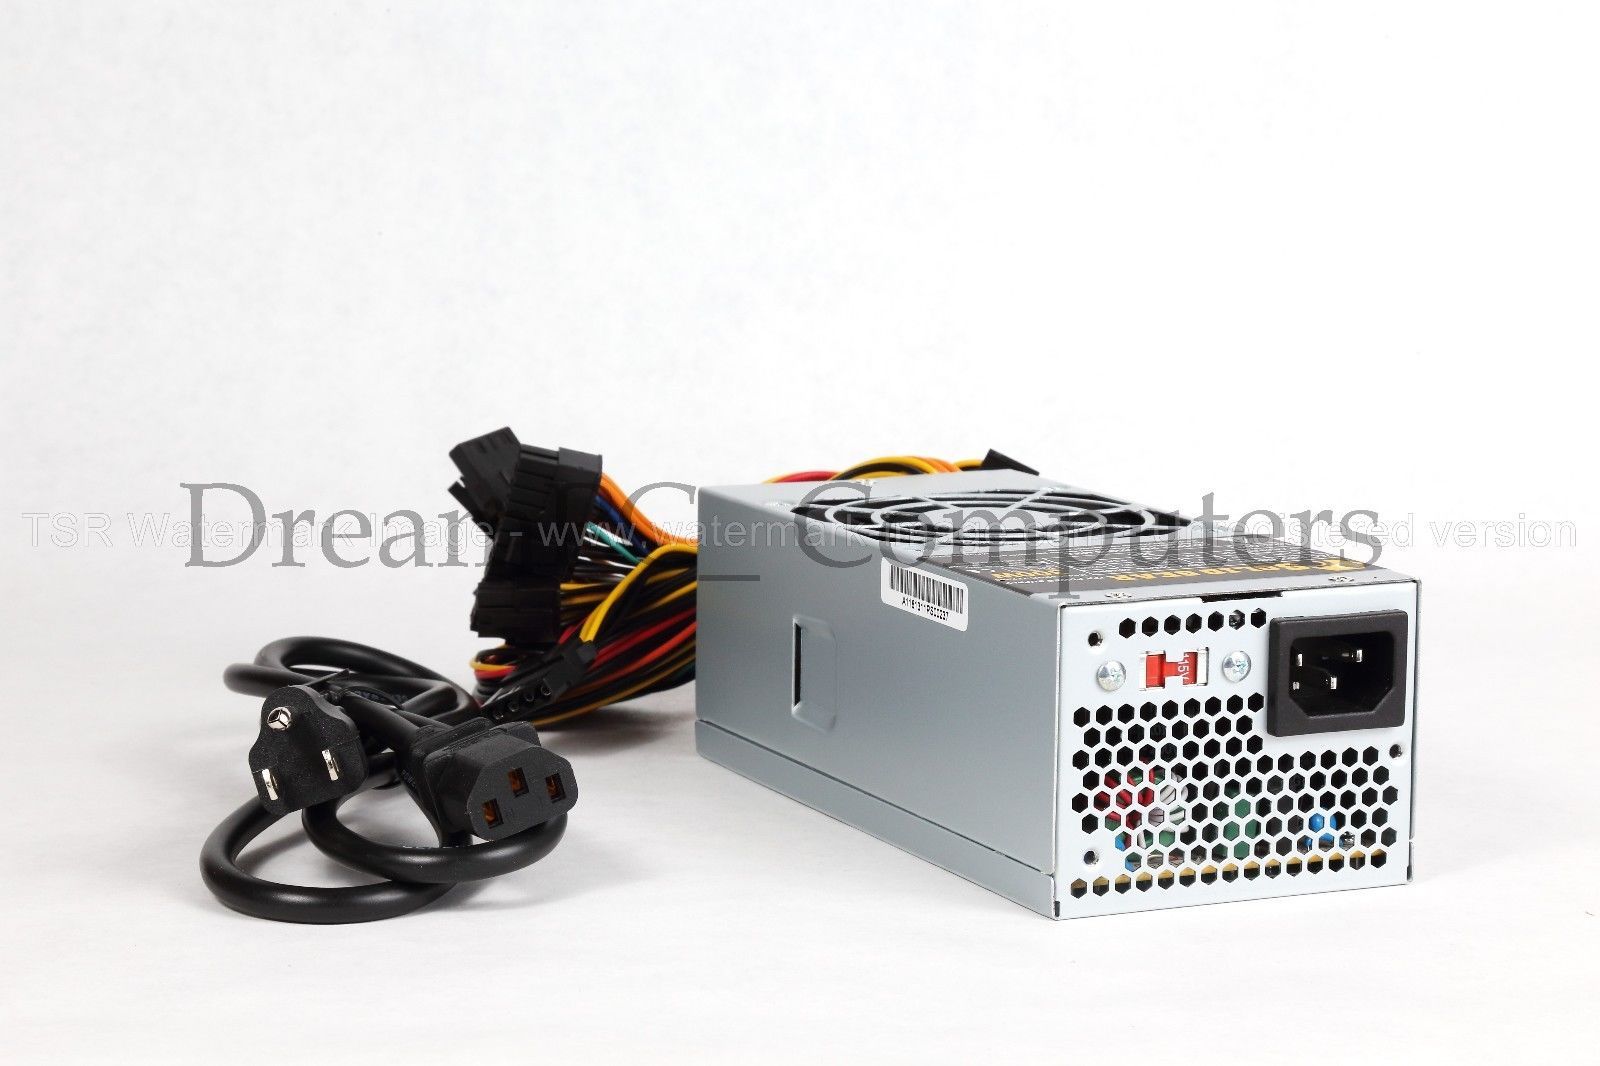 New PC Power Supply Upgrade for HP Pavilion s5623w Slimline SFF Computer 